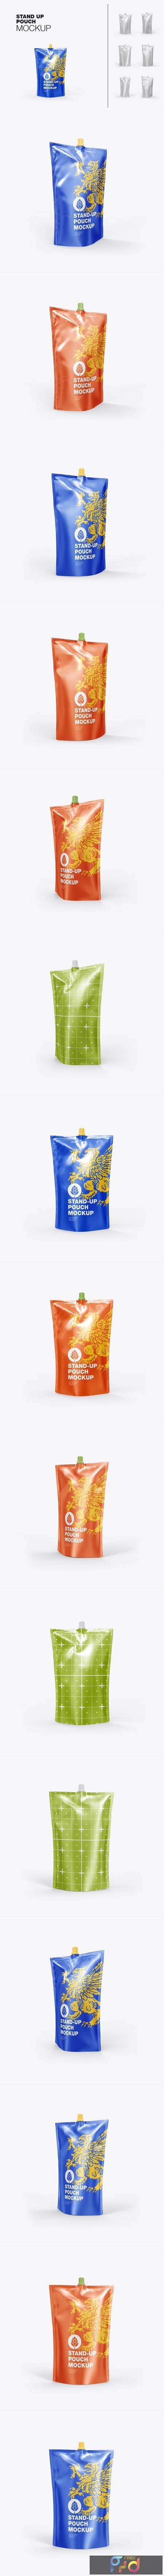 Set Liquid Stand Up Pouch Mockup R5LXEUK 1